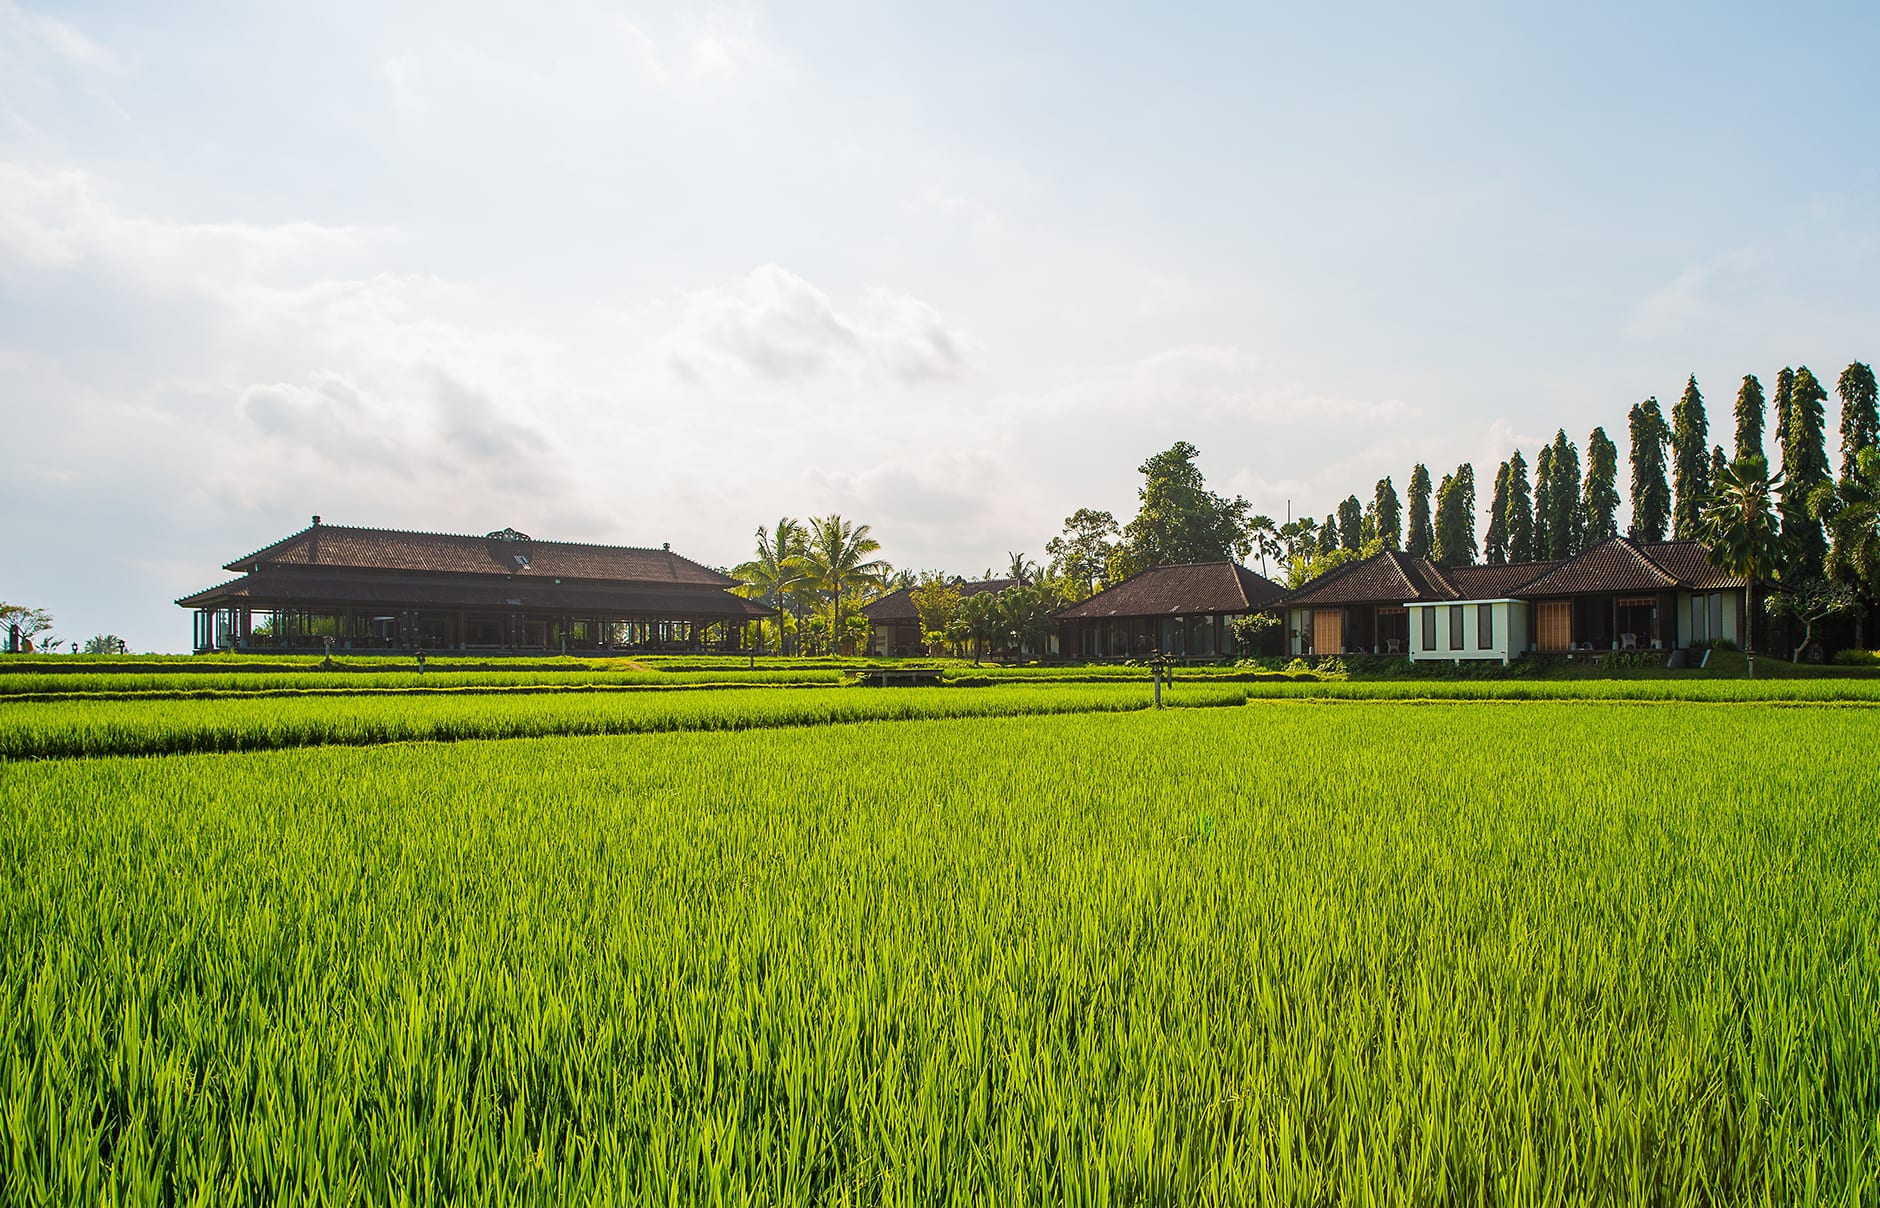 The Chedi Club Tanah Gajah, Ubud, Bali. Hotel Review by TravelPlusStyle. Photo © GHM Hotels